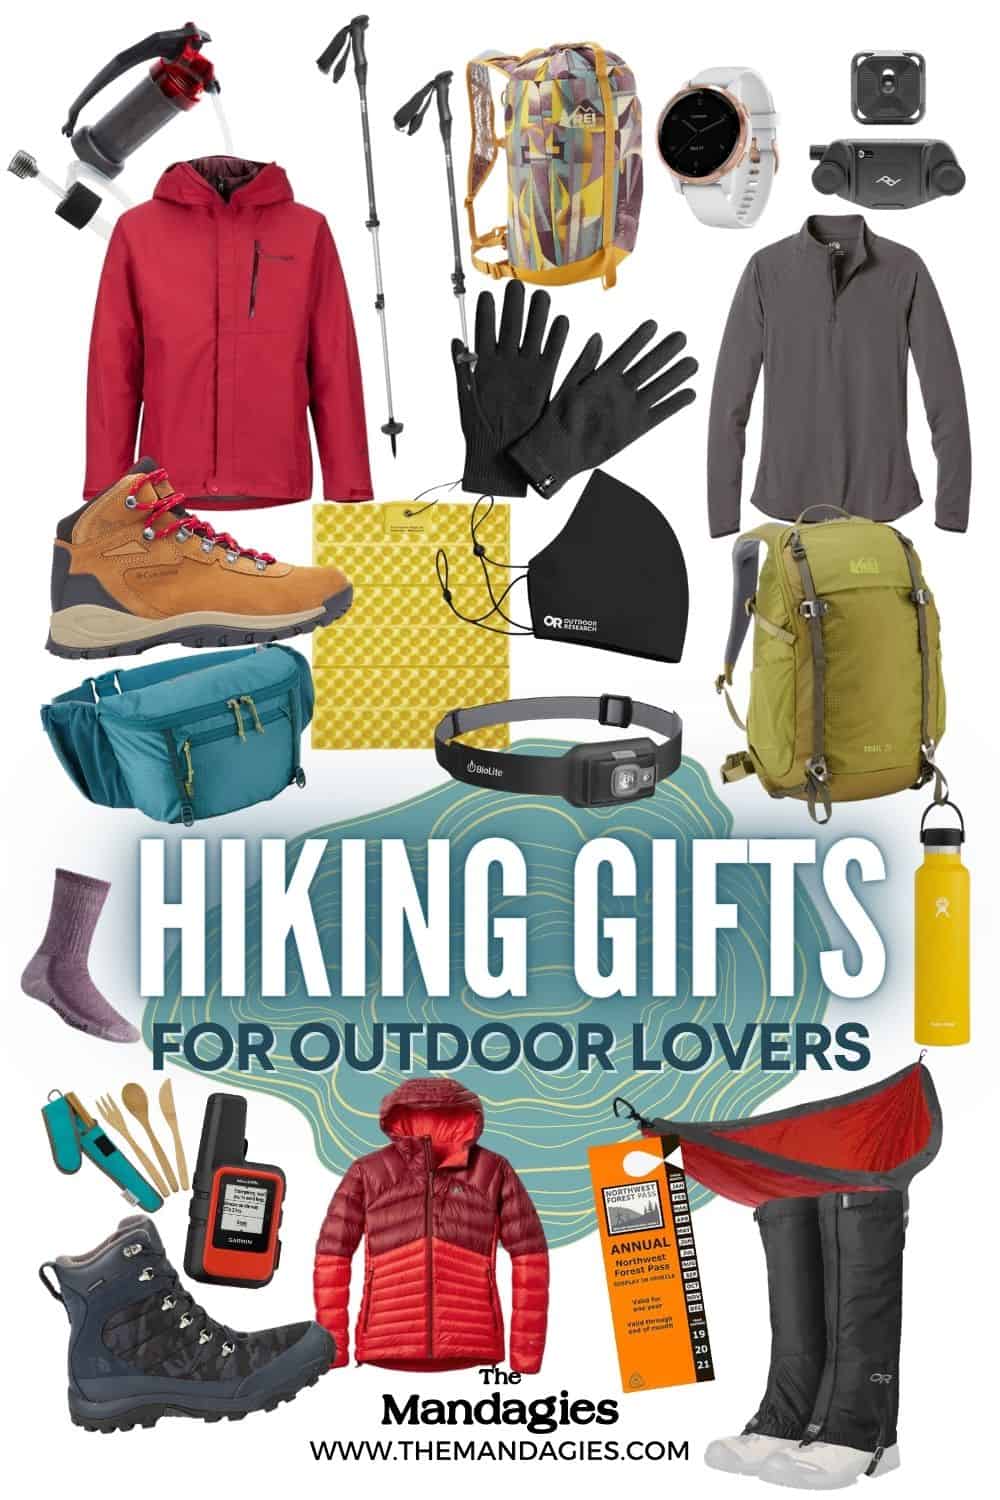 15 Best Gifts For Hikers Under 50 (Gadgets, Clothes